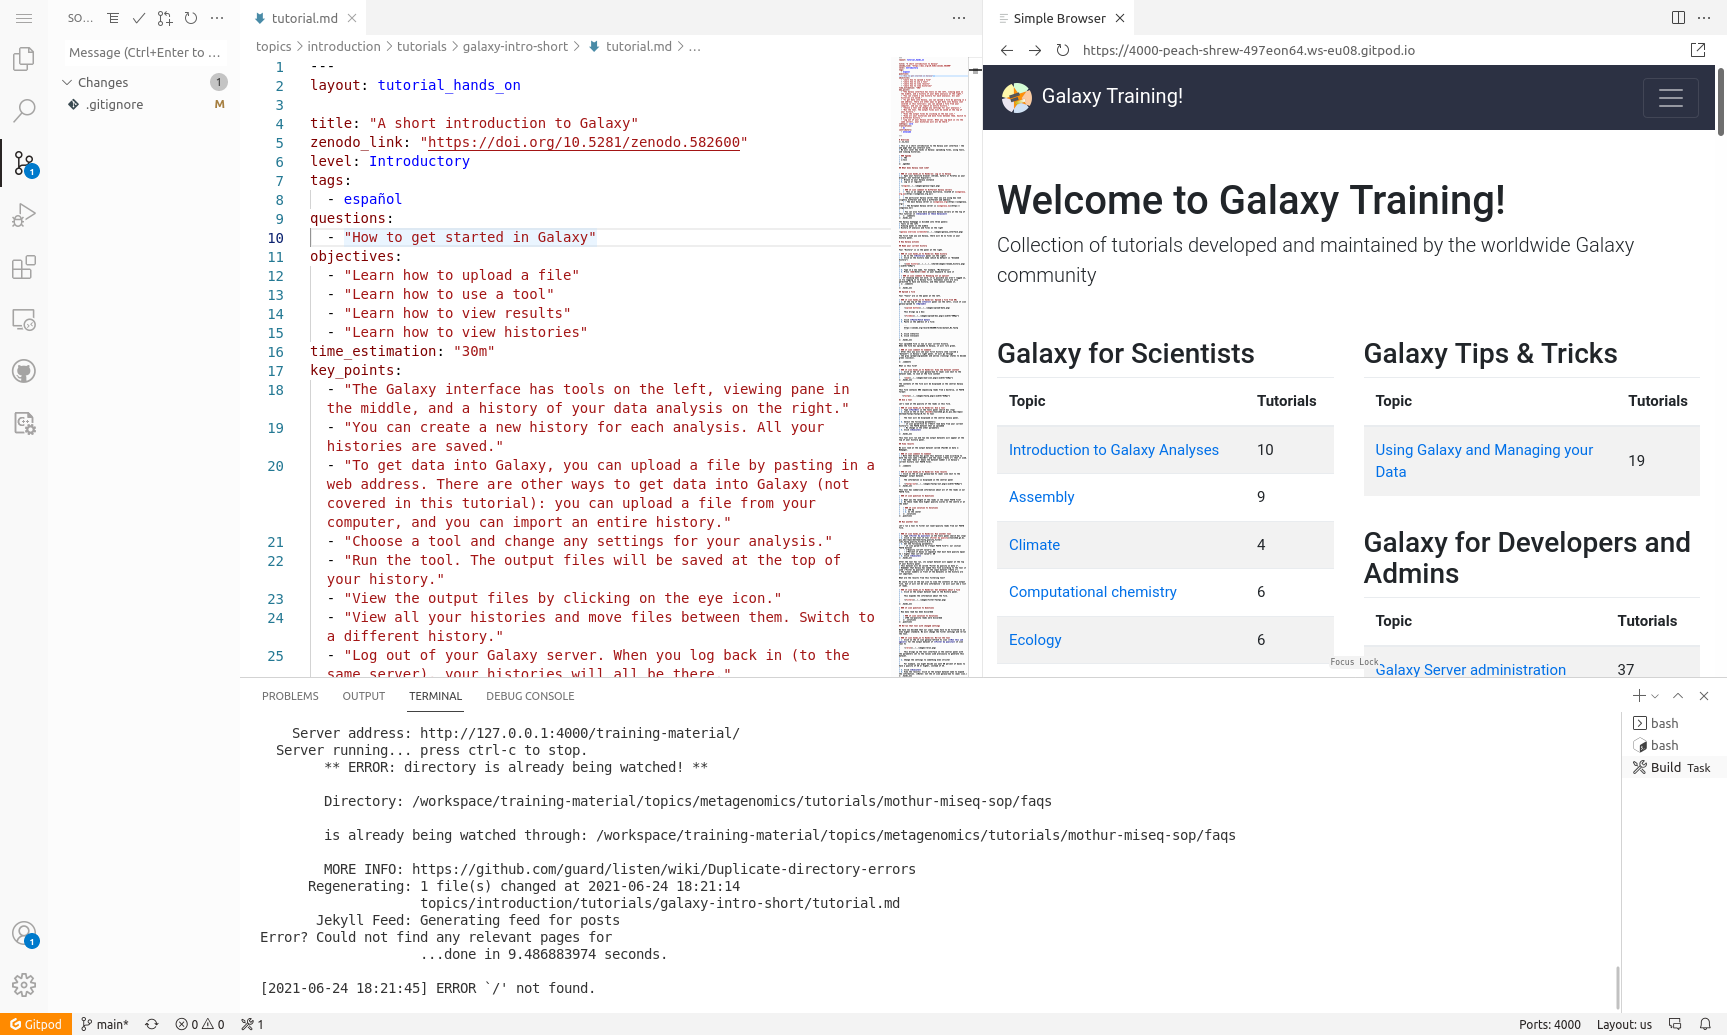 Screenshot of the GitPod workspace. A file browser pane on the left, terminal on the bottom, text editor in the middle, and preview of the rendered GTN website on the right.